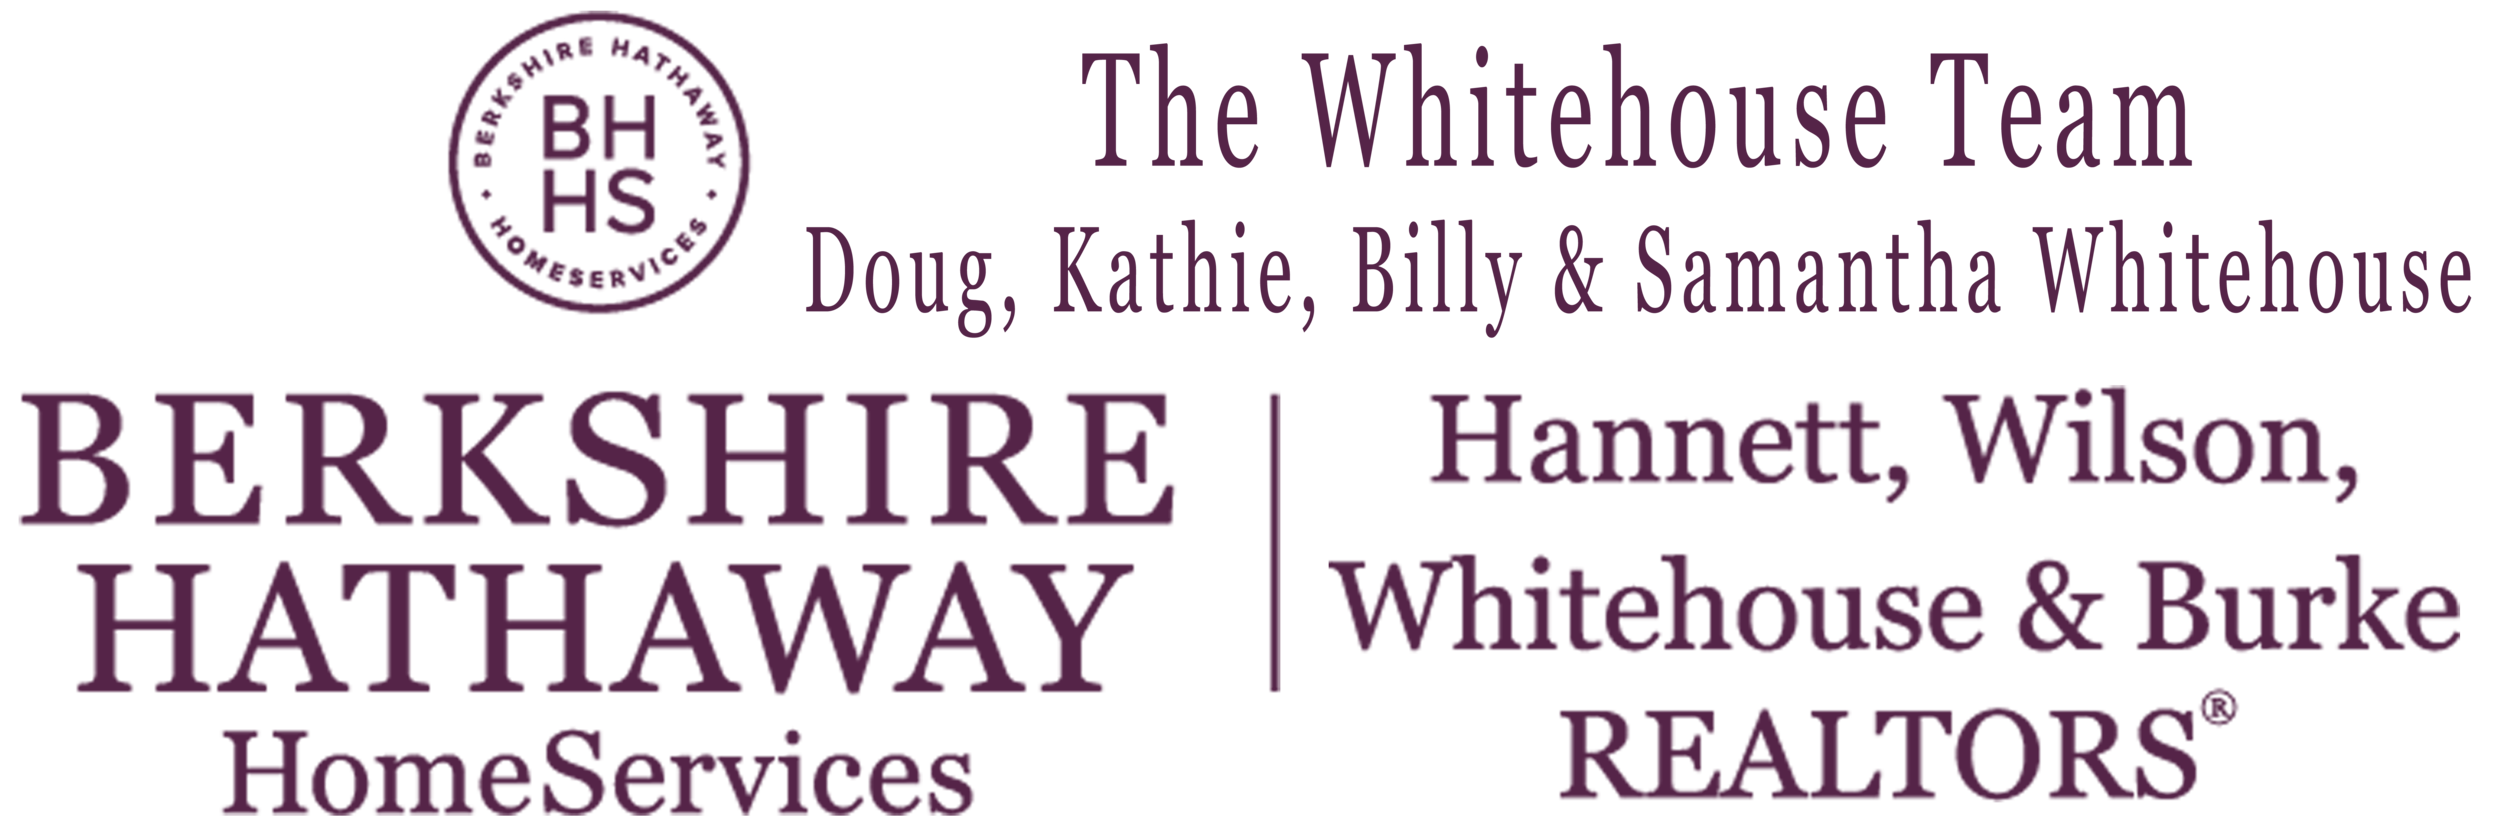 Logo - The Whitehouse Team (Large).png